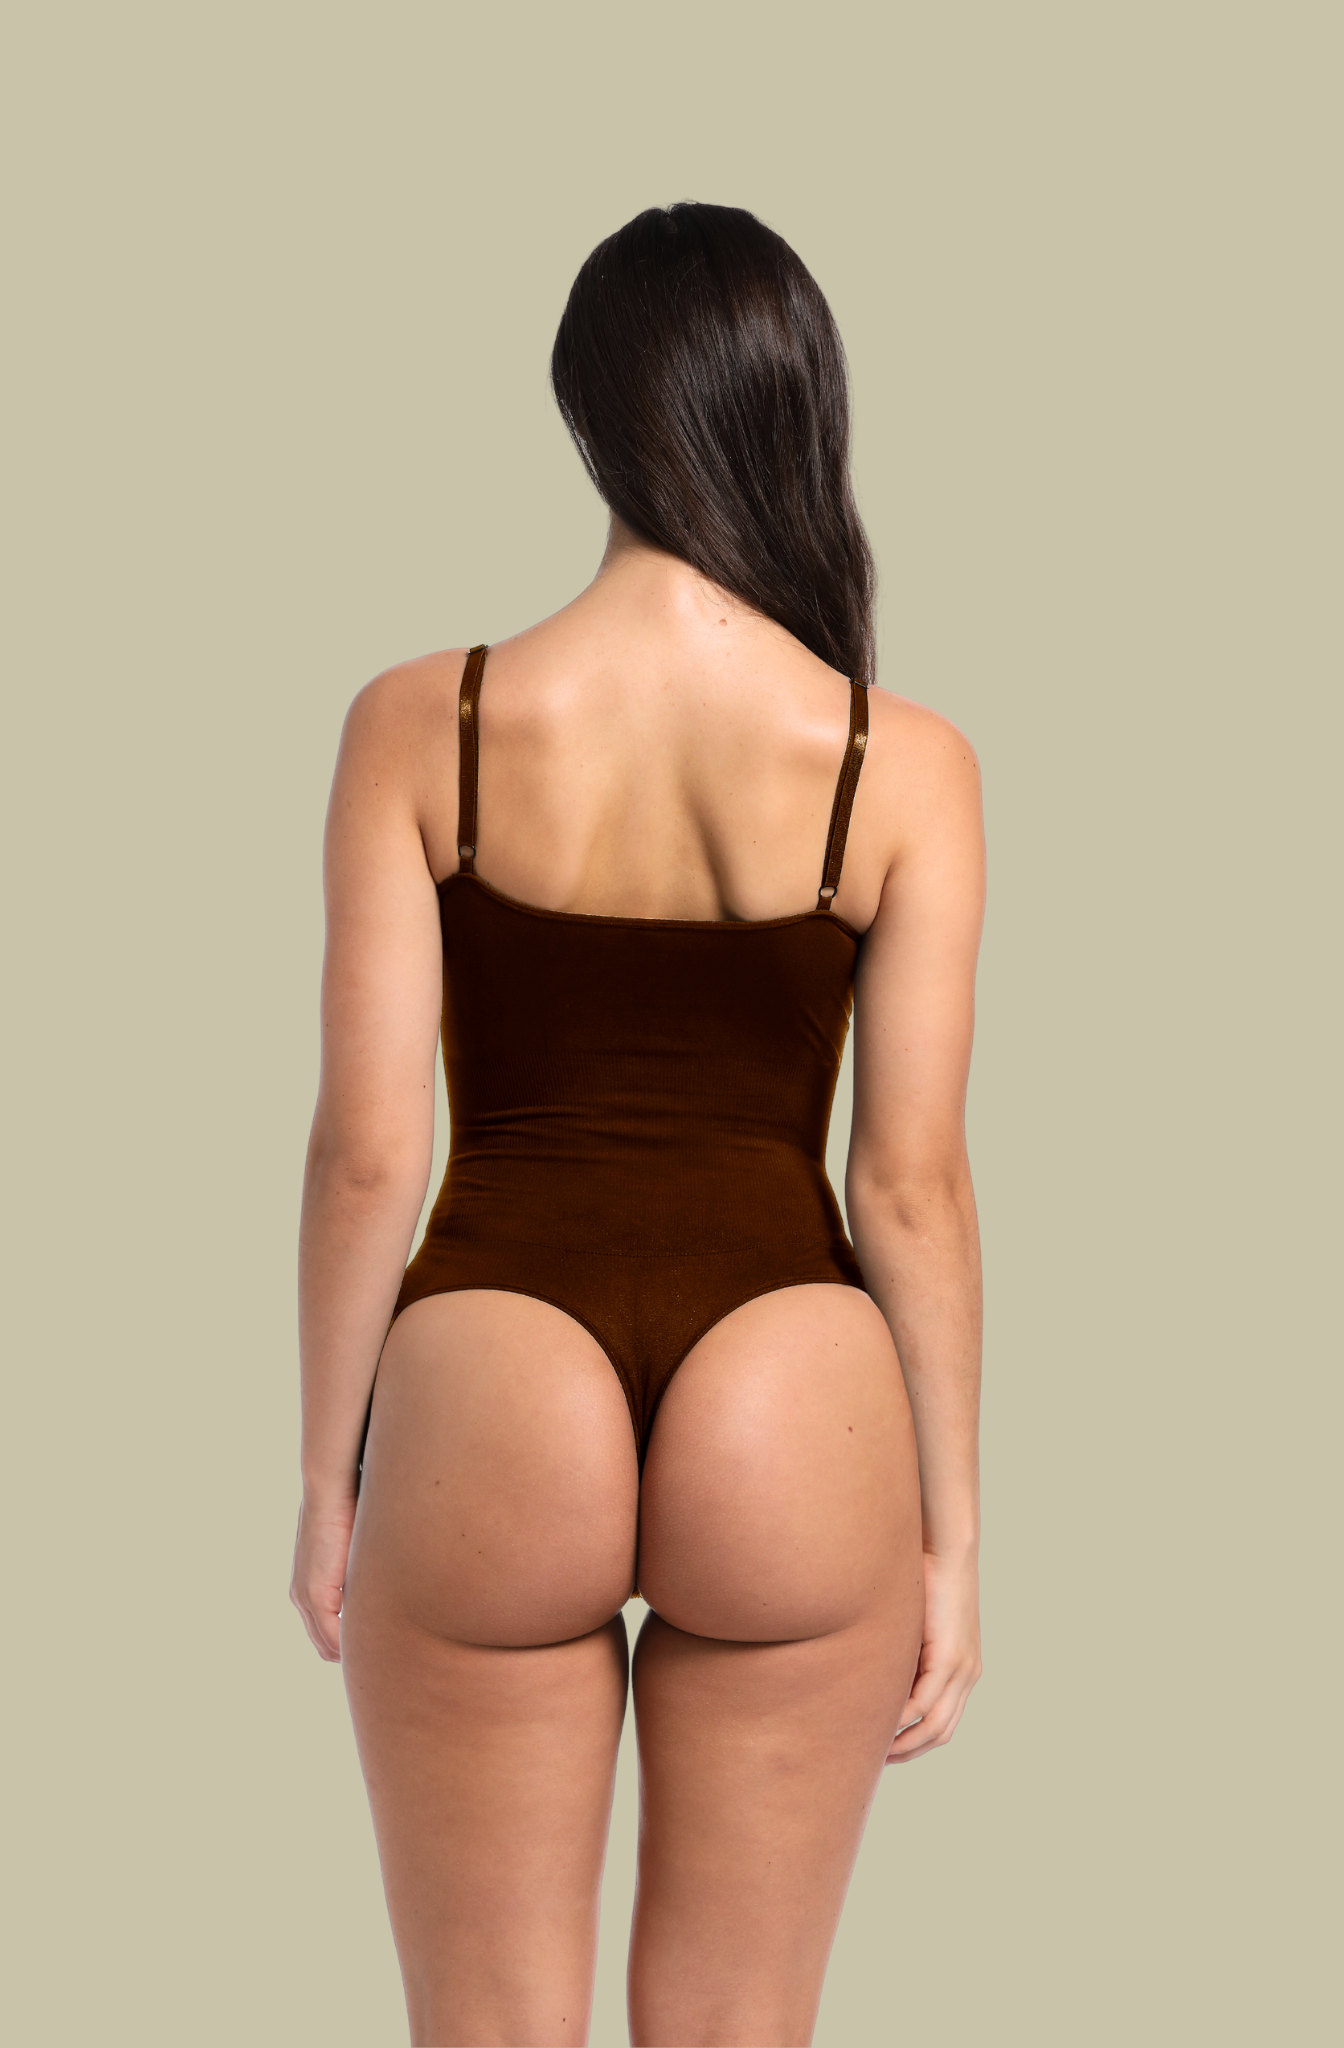 eShoppers get the hots for backless thong • The Register